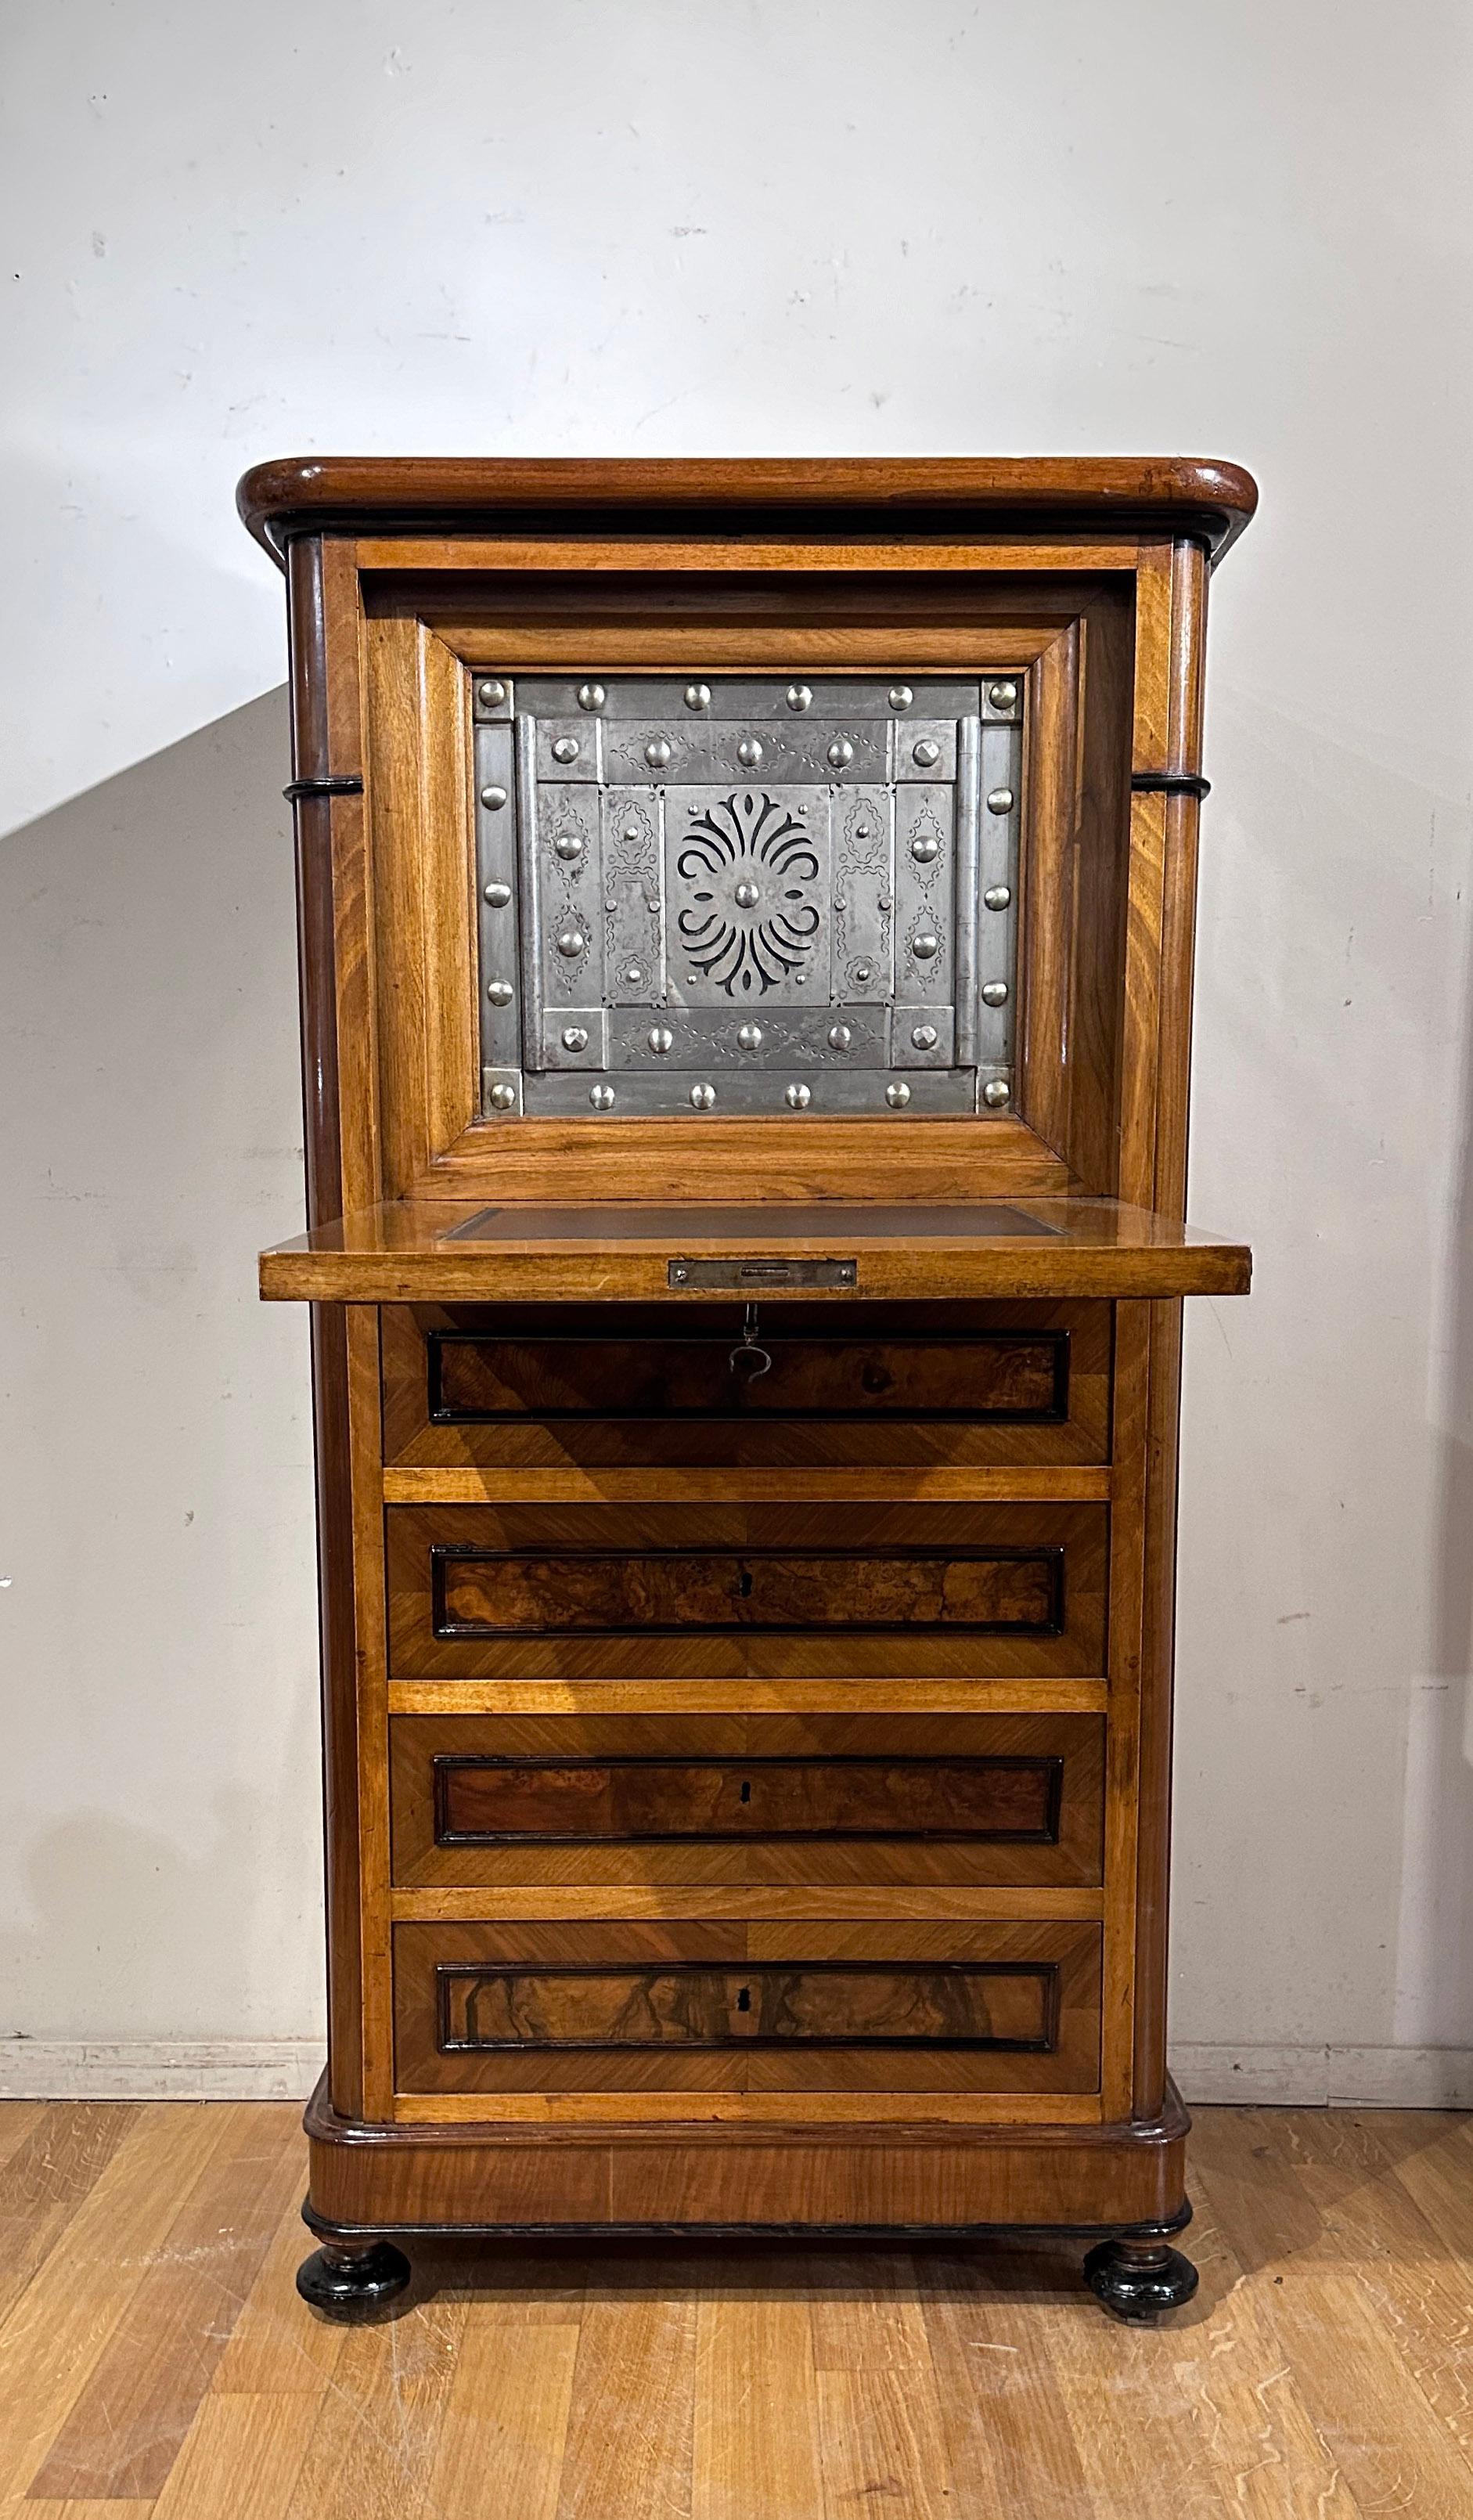 This burr walnut secrétaire is an elegant and distinctive piece of furniture, characterized by a linear design and onion-shaped feet. Its peculiarity lies in the presence of a safe hidden inside the folding top, covered in leather. The iron safe